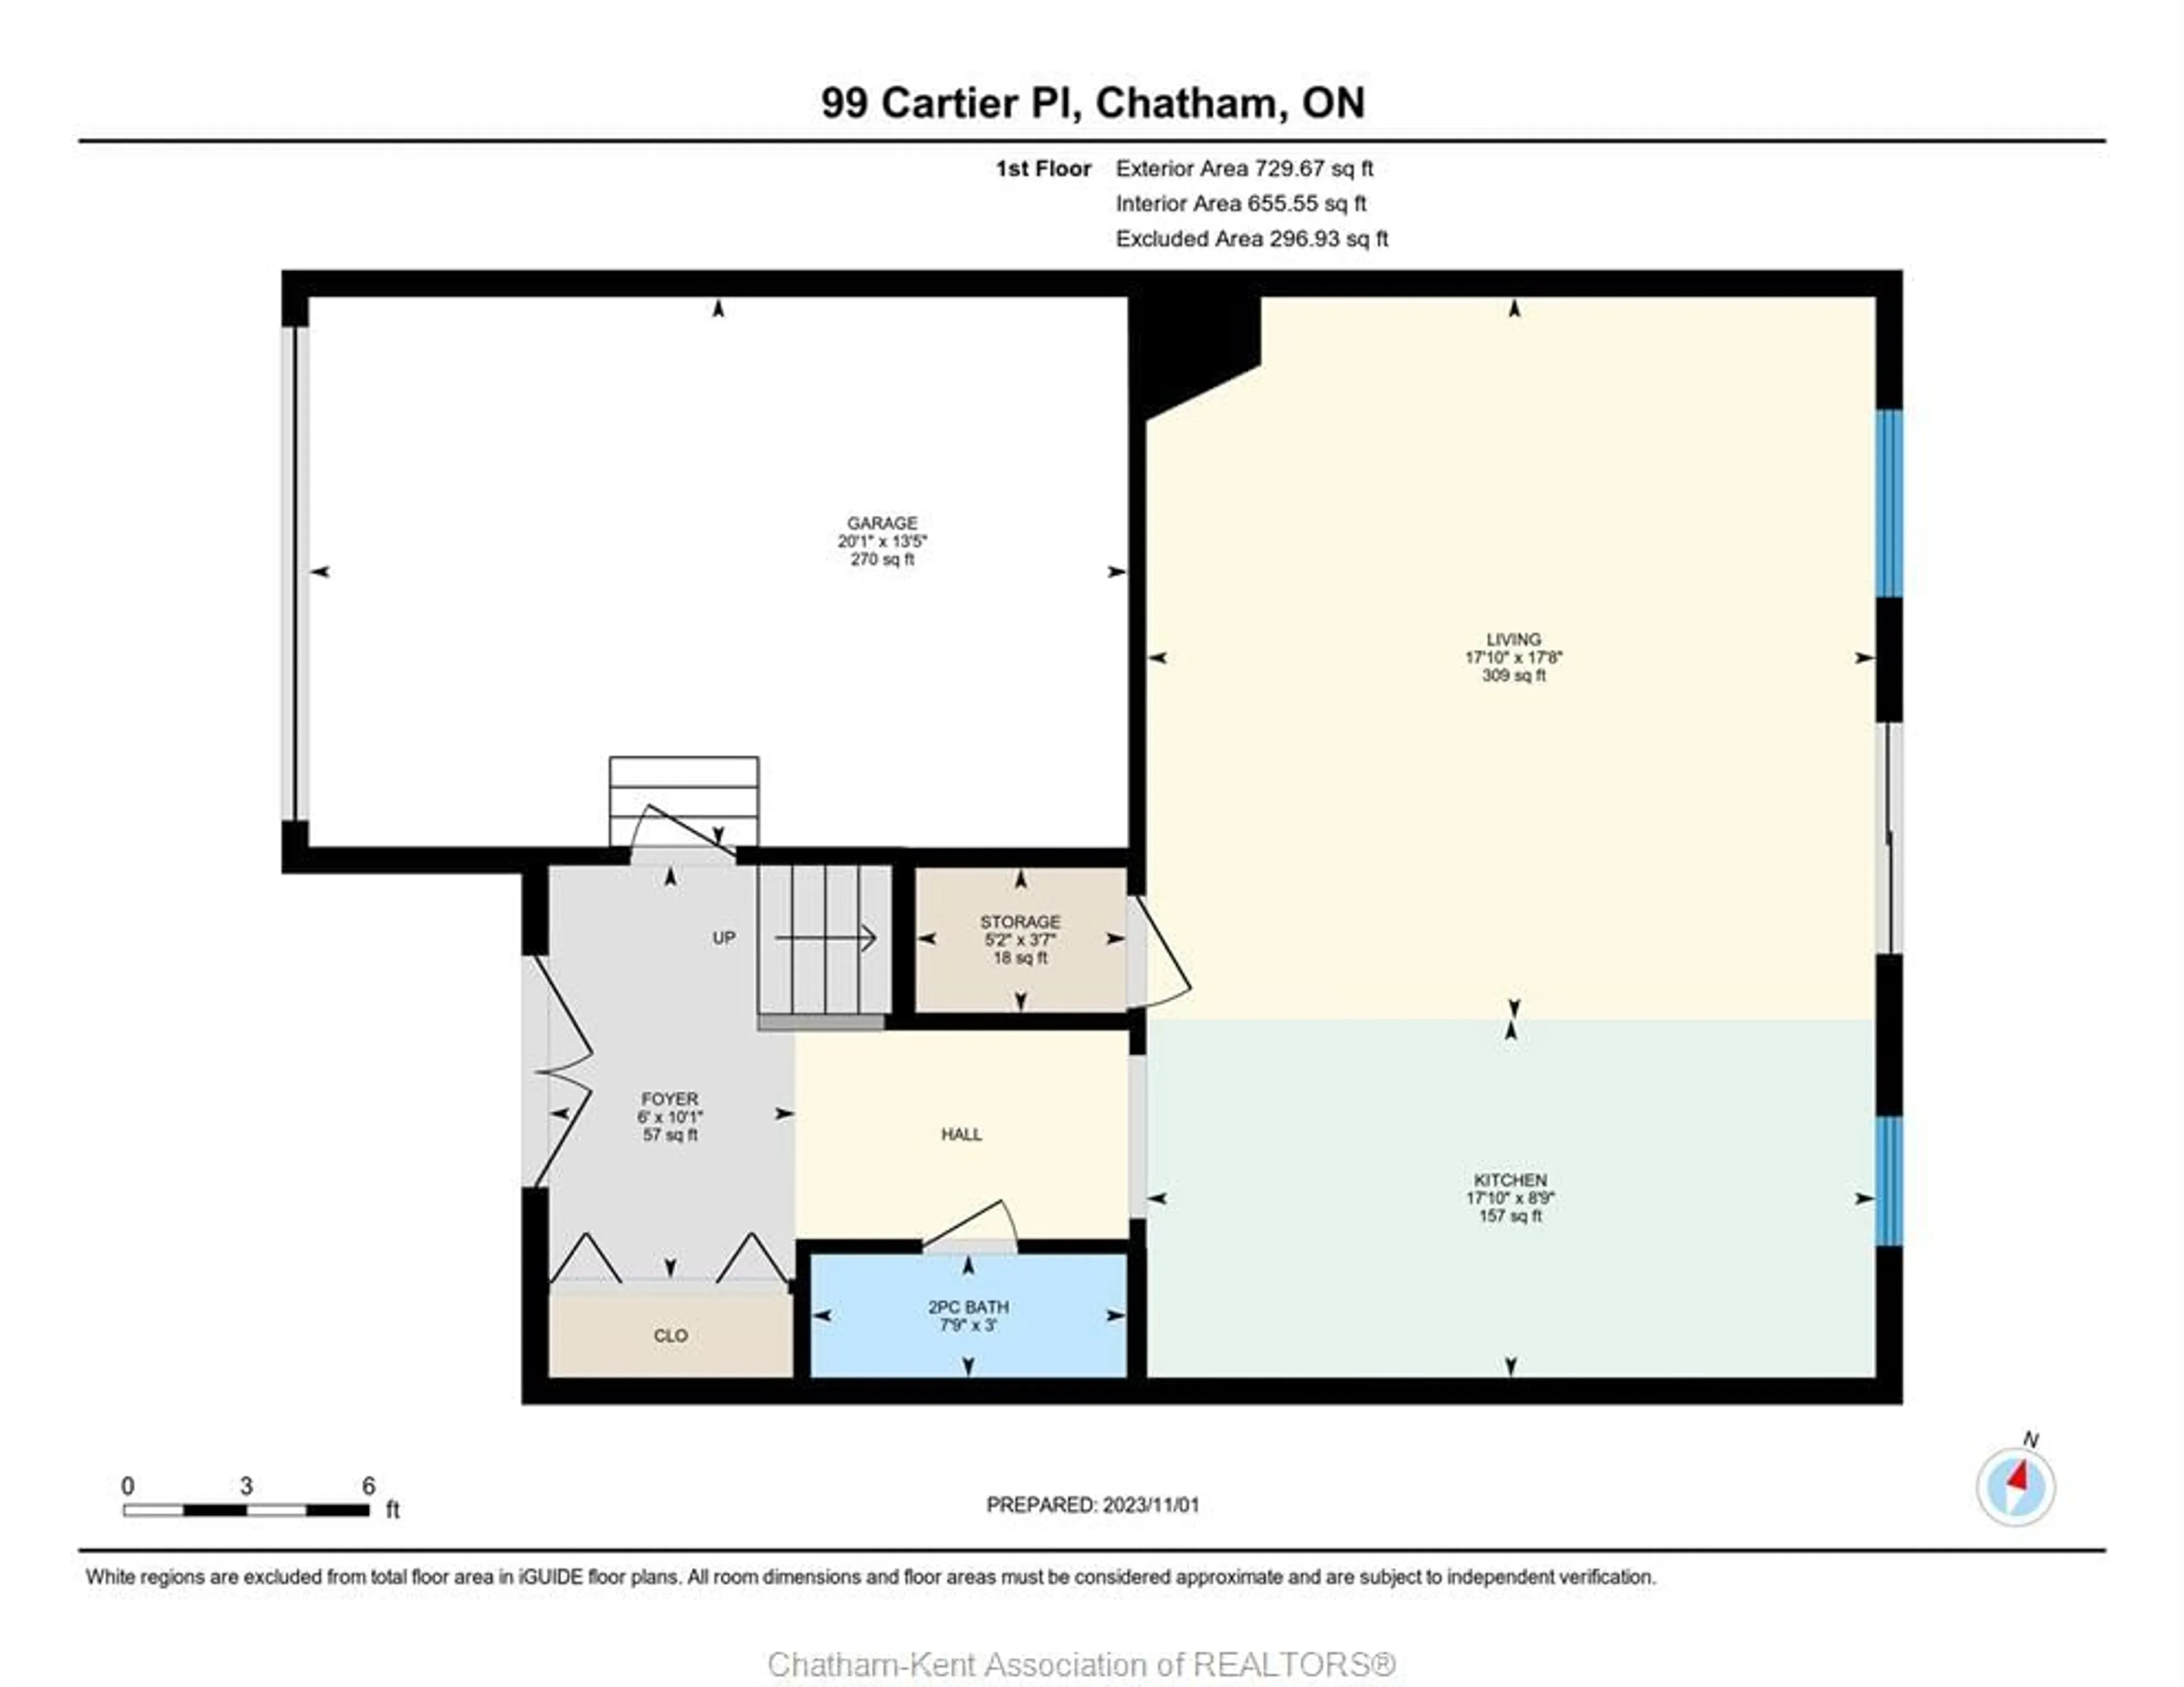 Floor plan for 99 Cartier Pl, Chatham Ontario N7L 5R1